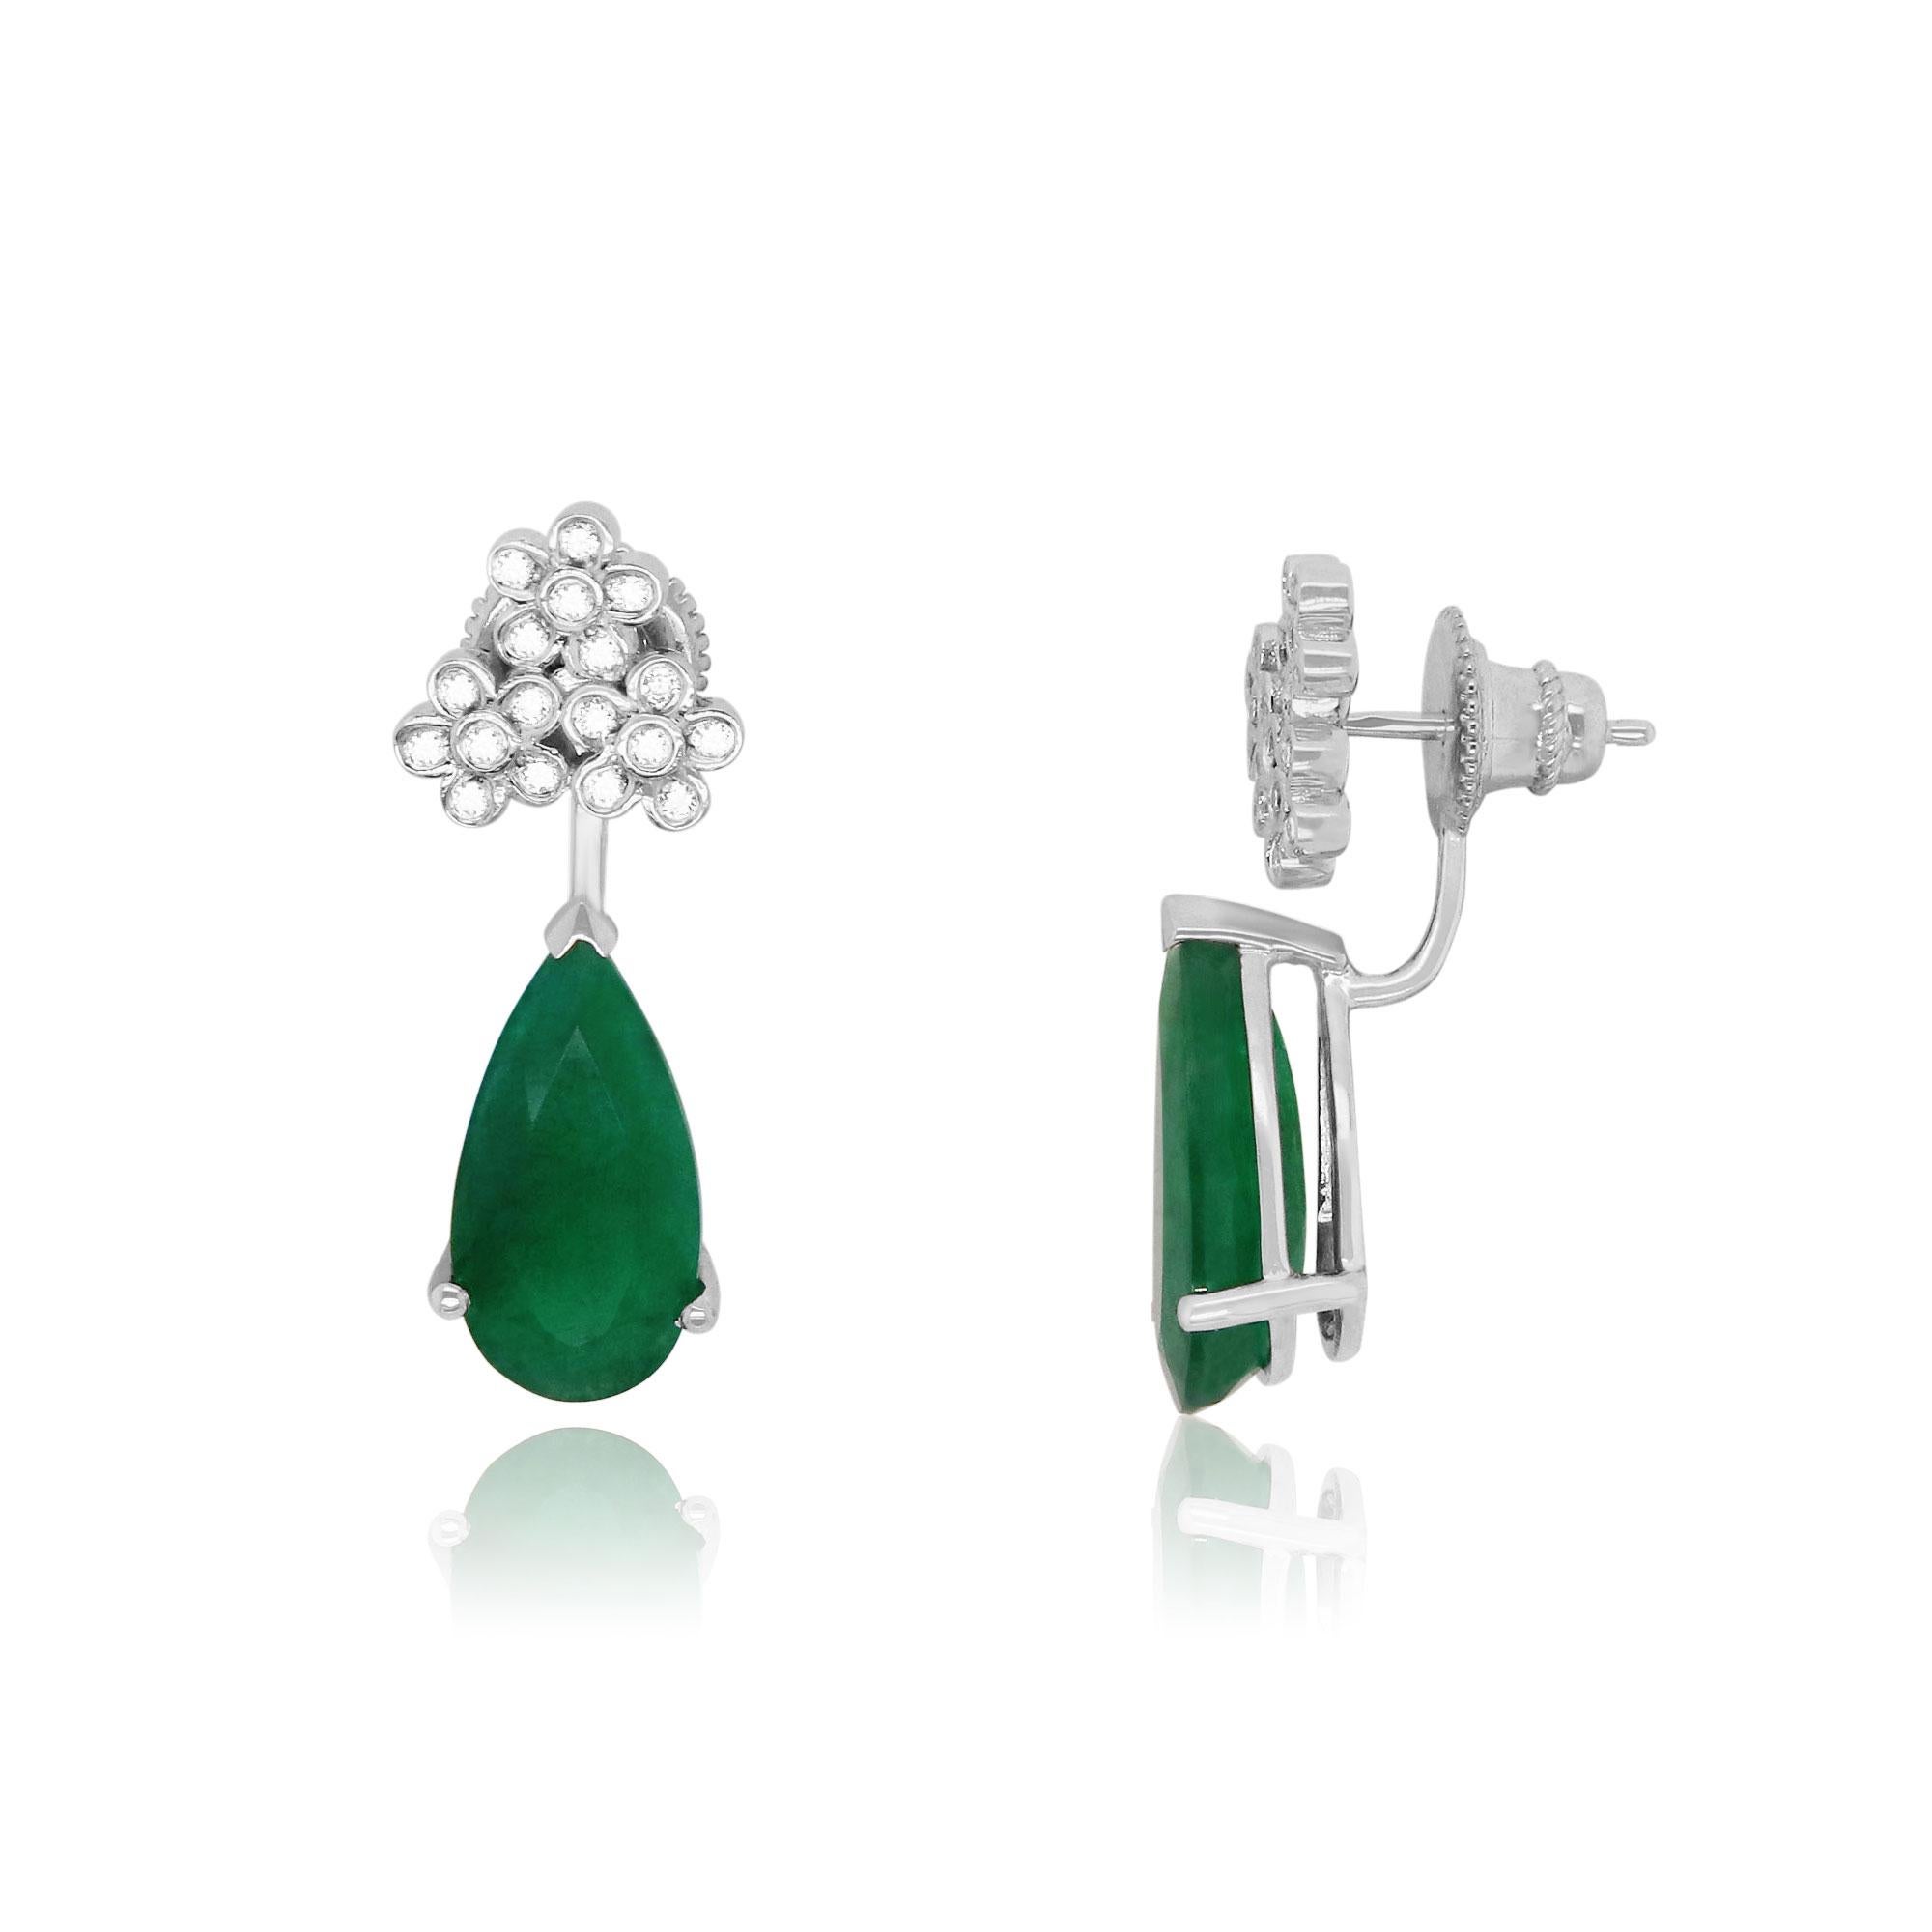 Material: 14k White Gold 
Stone Details: 2 Pear Shaped Emeralds at 6.97 Carats Total
Diamond Details: 36 Brilliant Round White Diamonds at 0.34 Carats. Clarity: SI / Color: H-I

Fine one-of-a-kind craftsmanship meets incredible quality in this